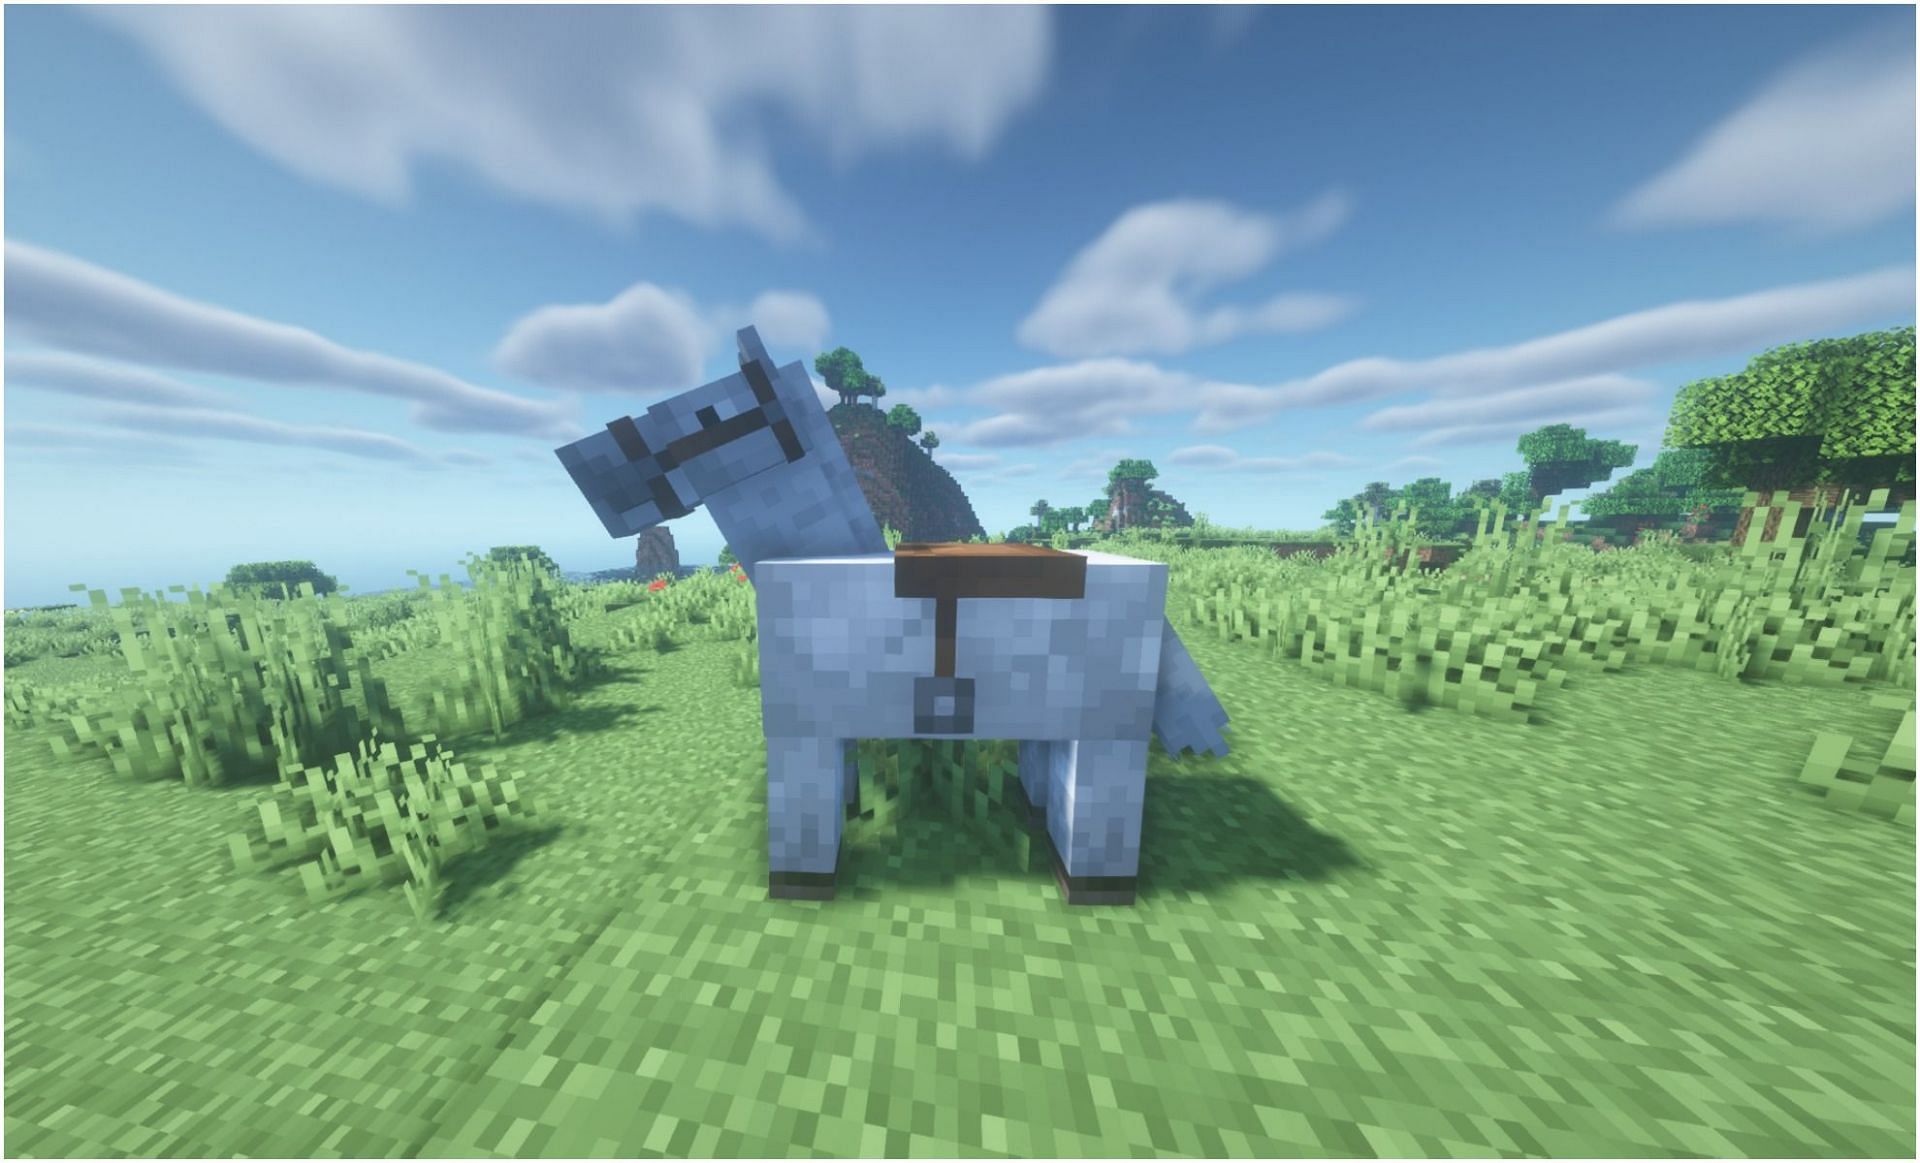 Strider vs. horse in Minecraft: How different are the two mobs?